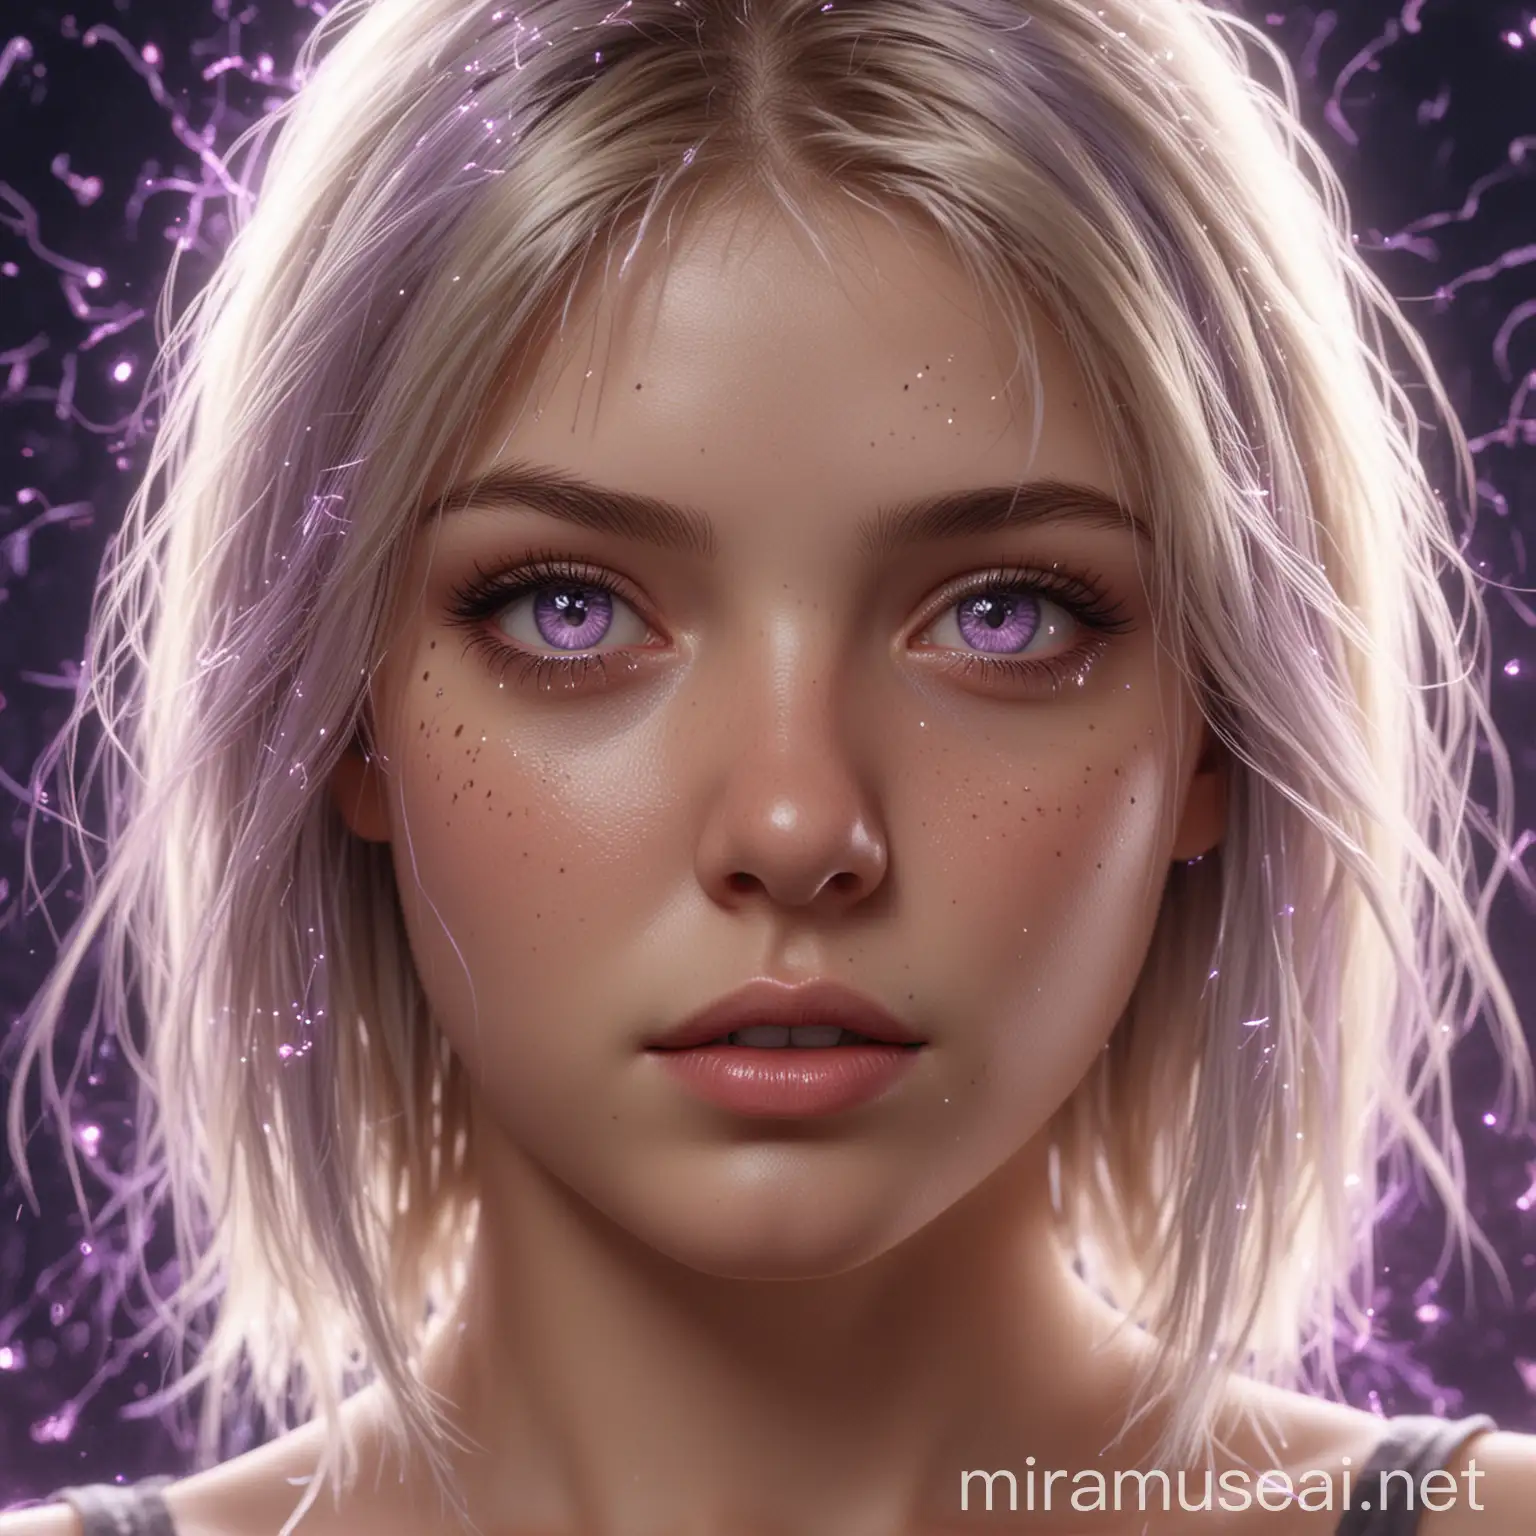 Electrifying Blonde Girl with Sparkling Eyes